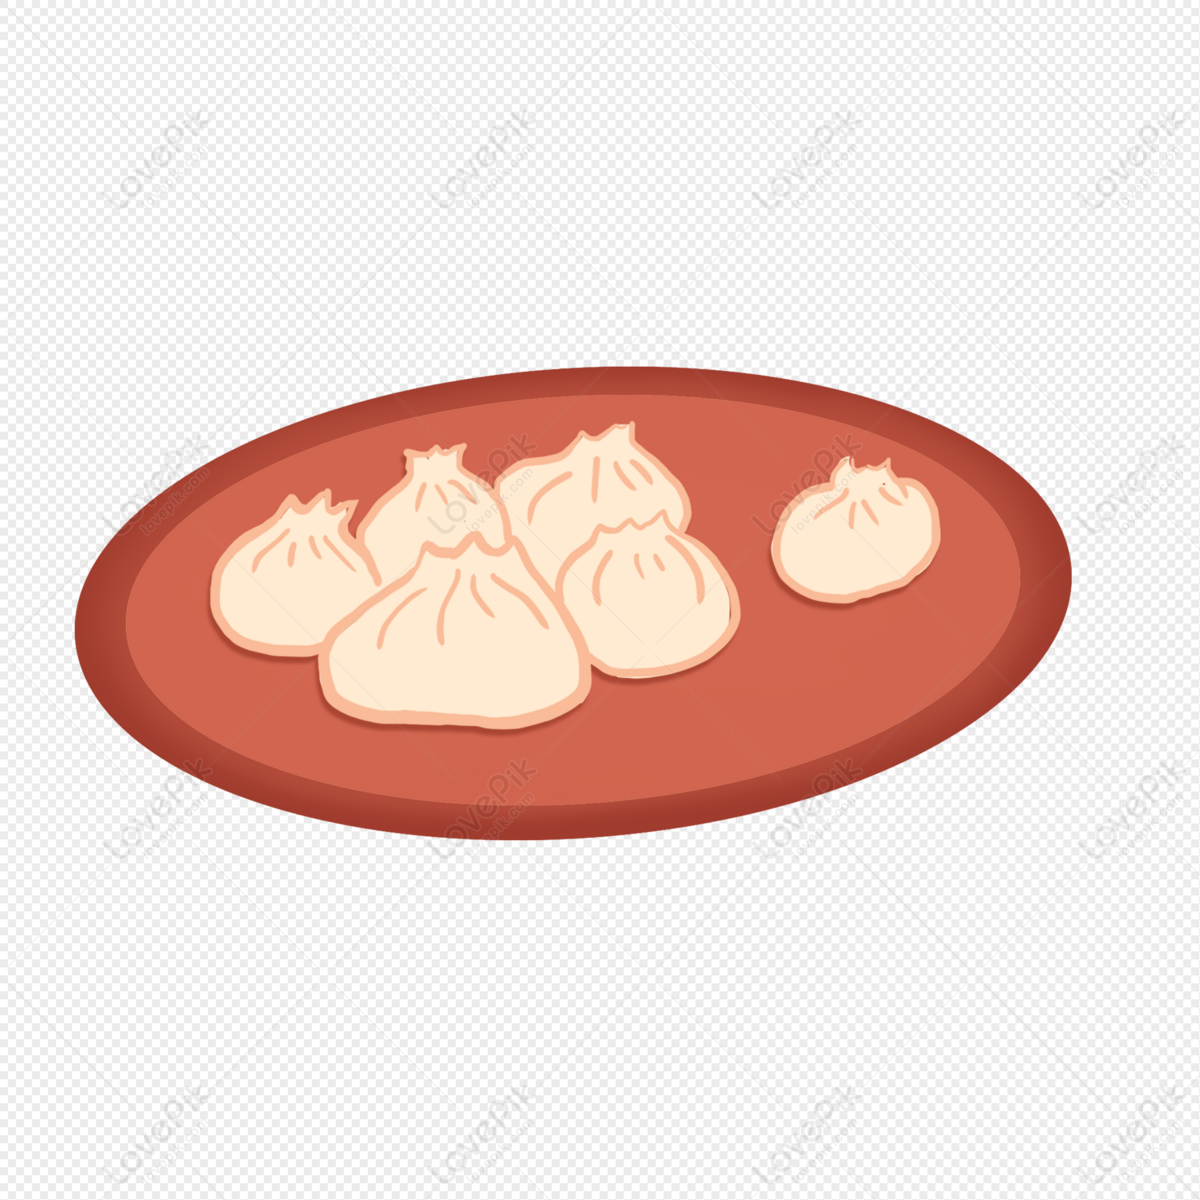 Hand Drawn Cartoon Buns PNG Hd Transparent Image And Clipart Image For ...